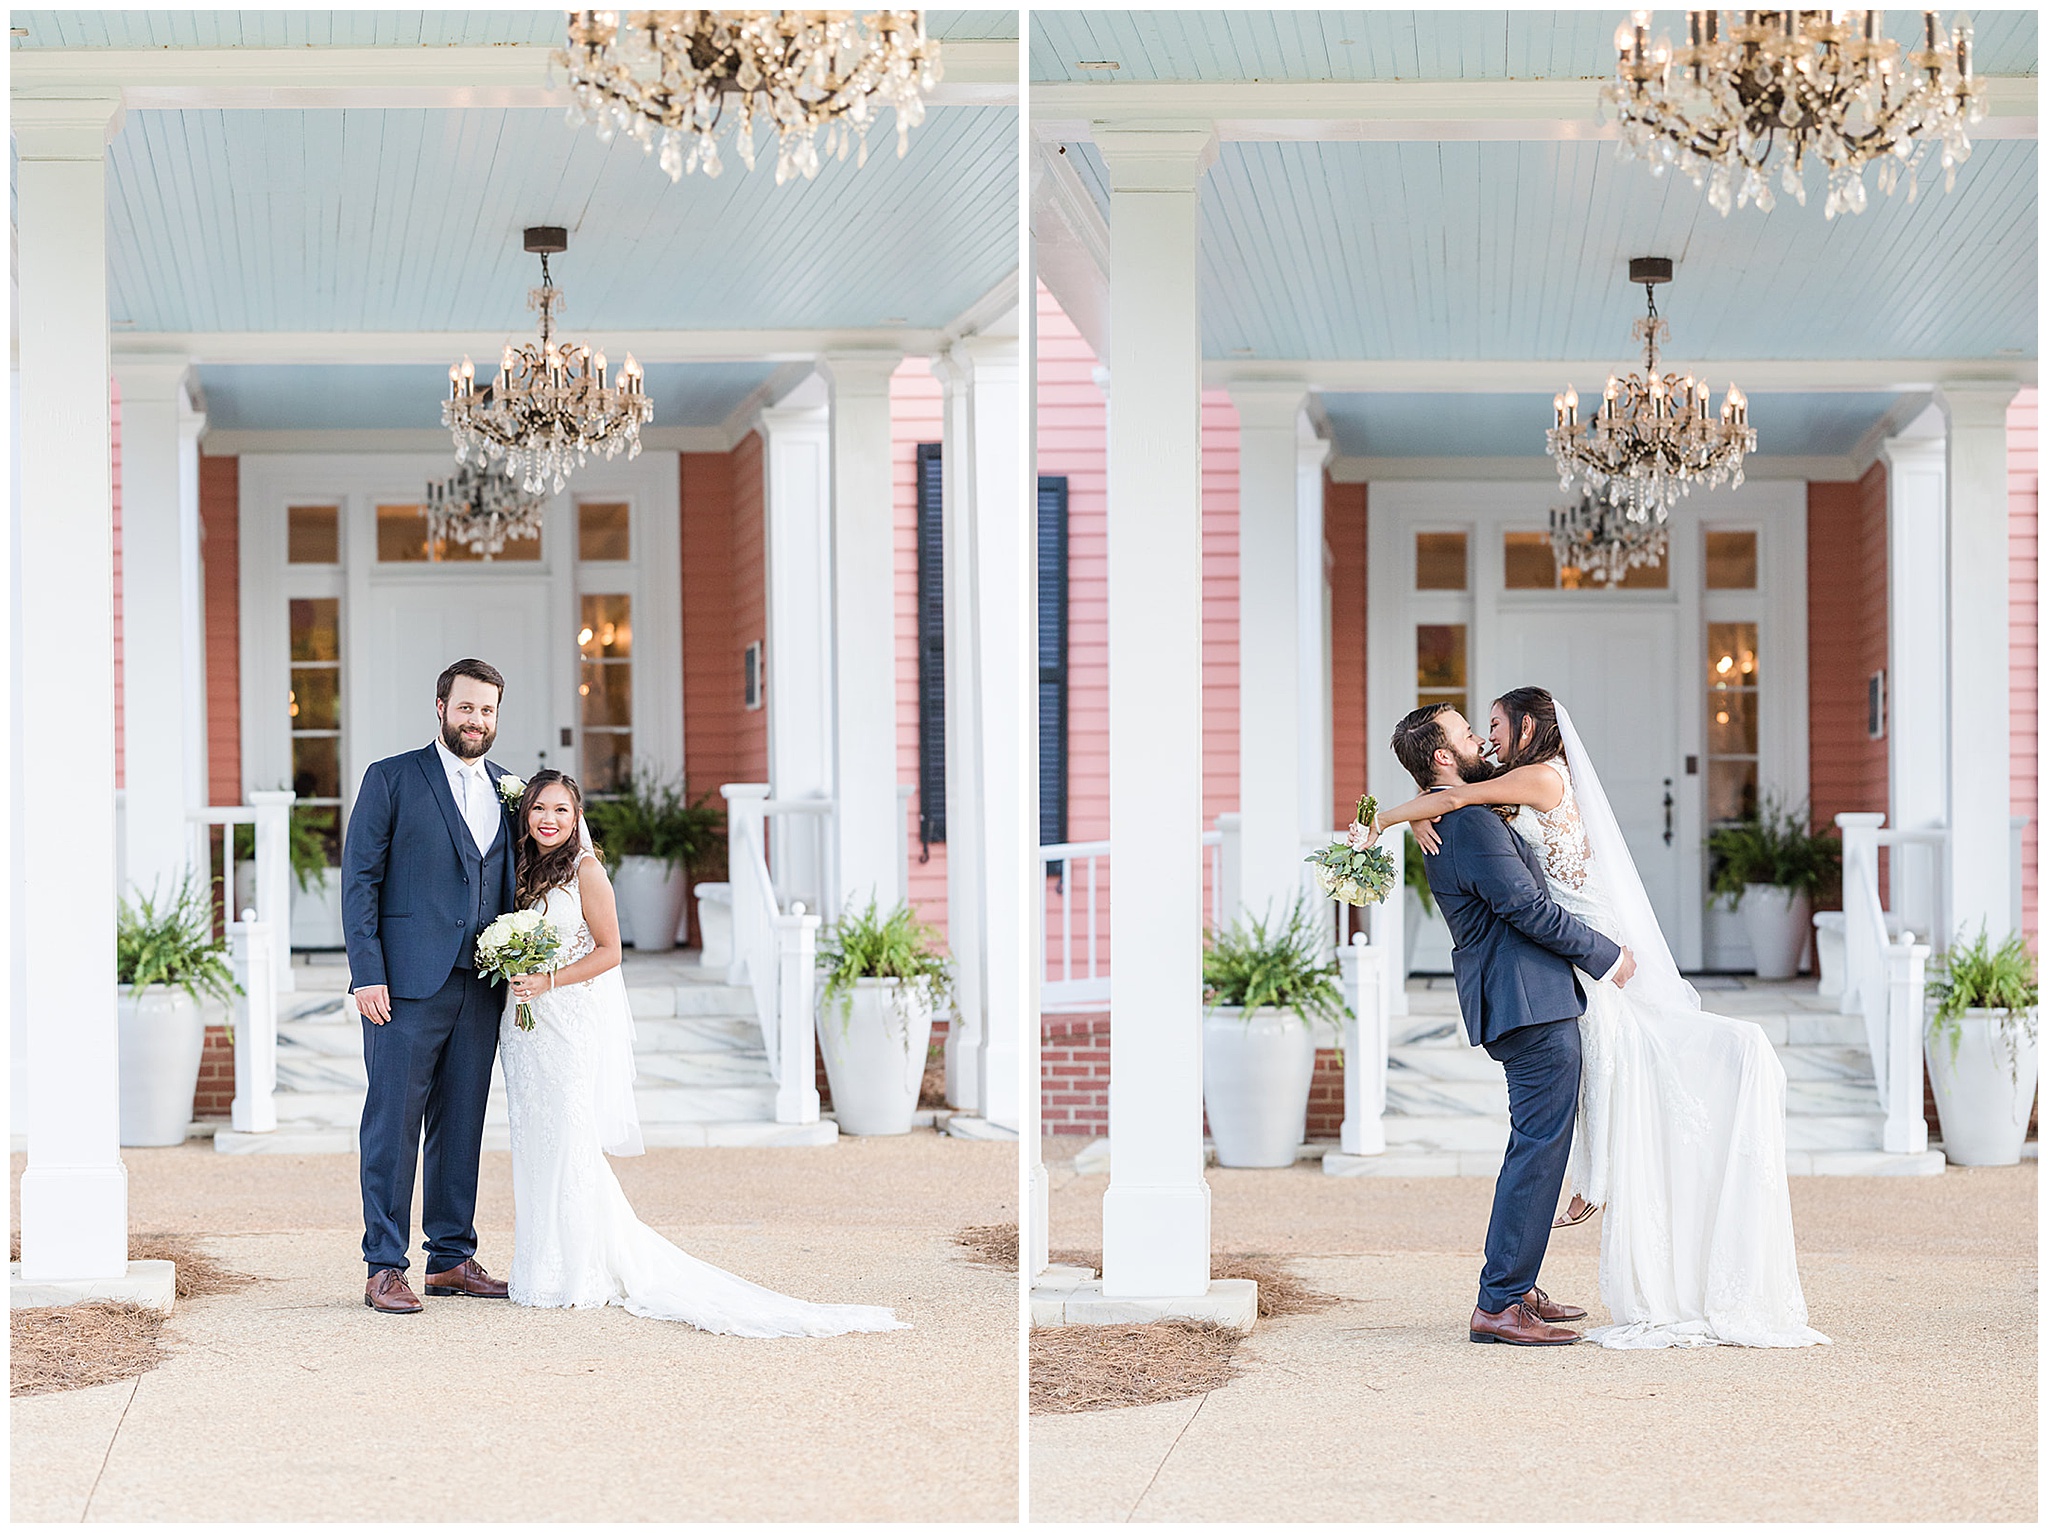 Groom lifts his new bride for a kiss under the car port front entrance and chandeliers of the south eden plantation